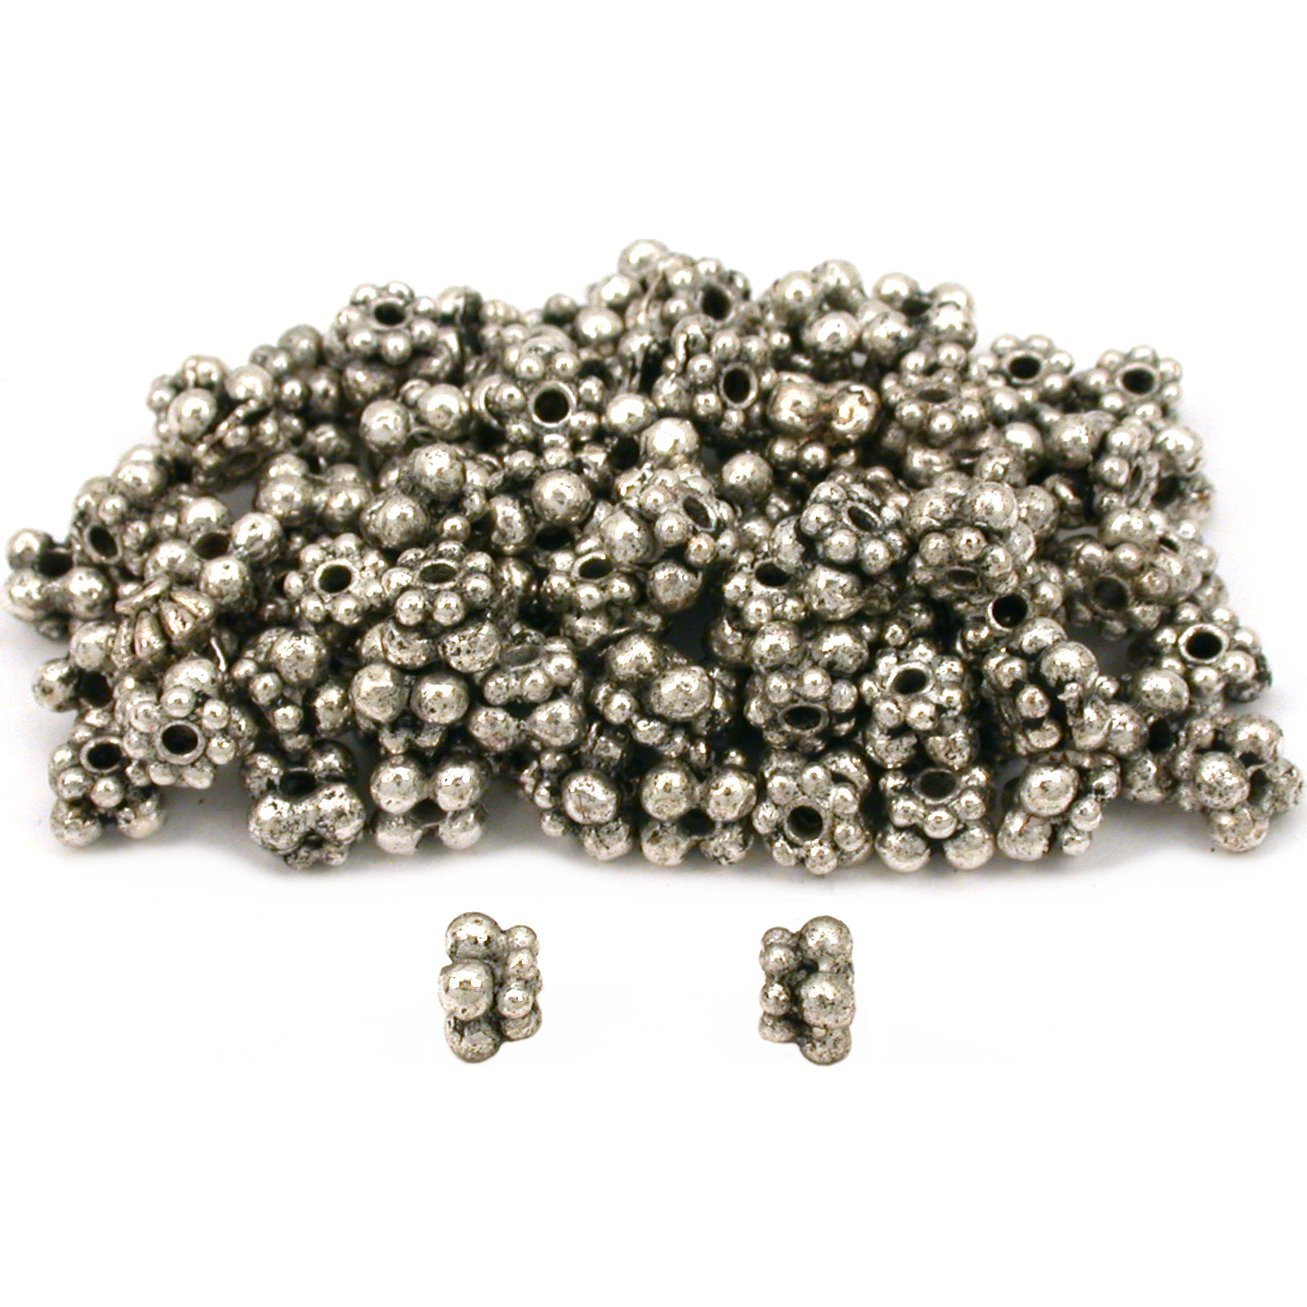 Daisy Spacer Bali Bead Antique Silver Plated Approx 100 - $20.82